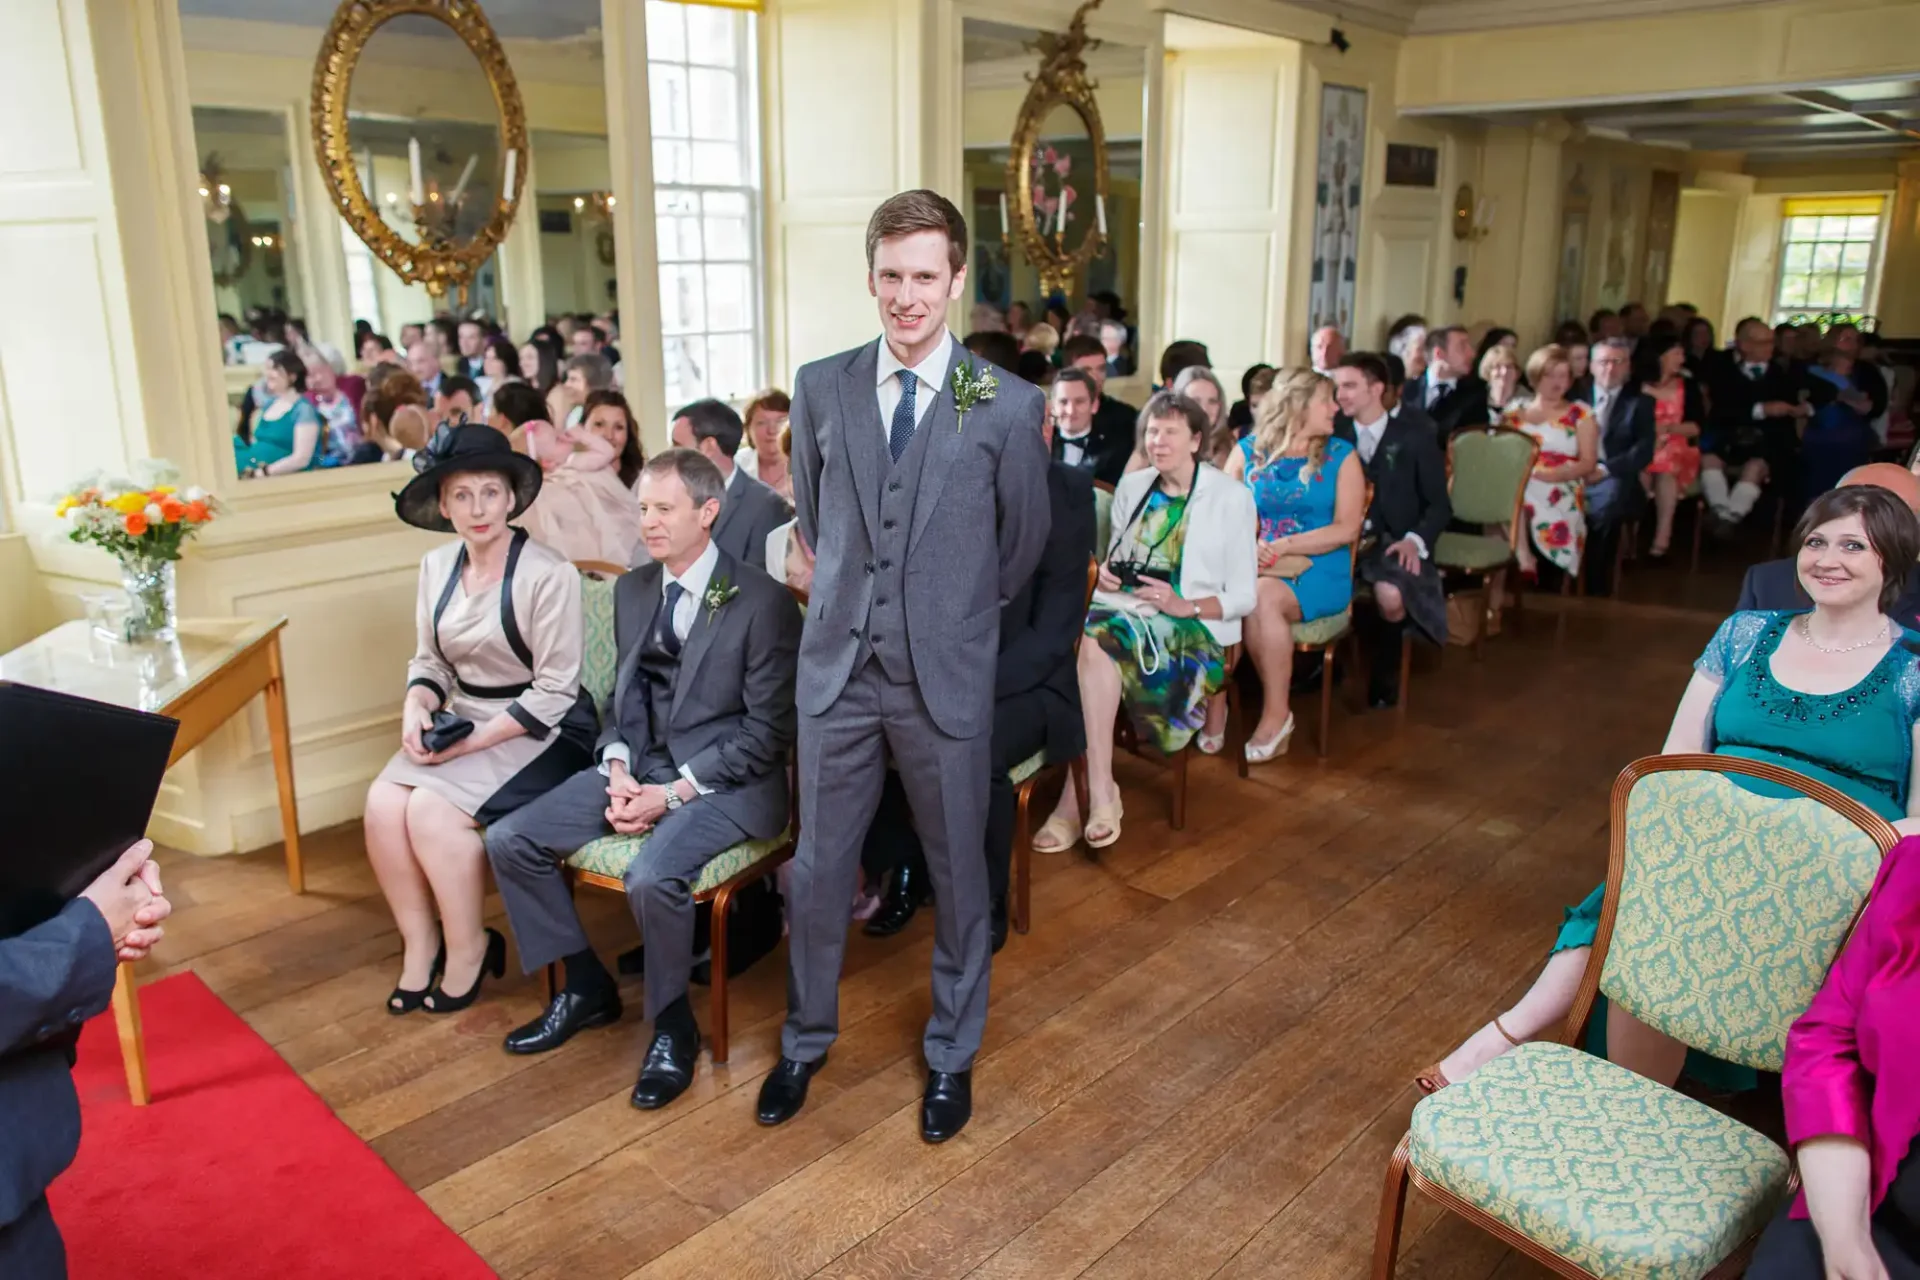 A groom standing confidently at a wedding ceremony in a well-lit hall with seated guests watching him.